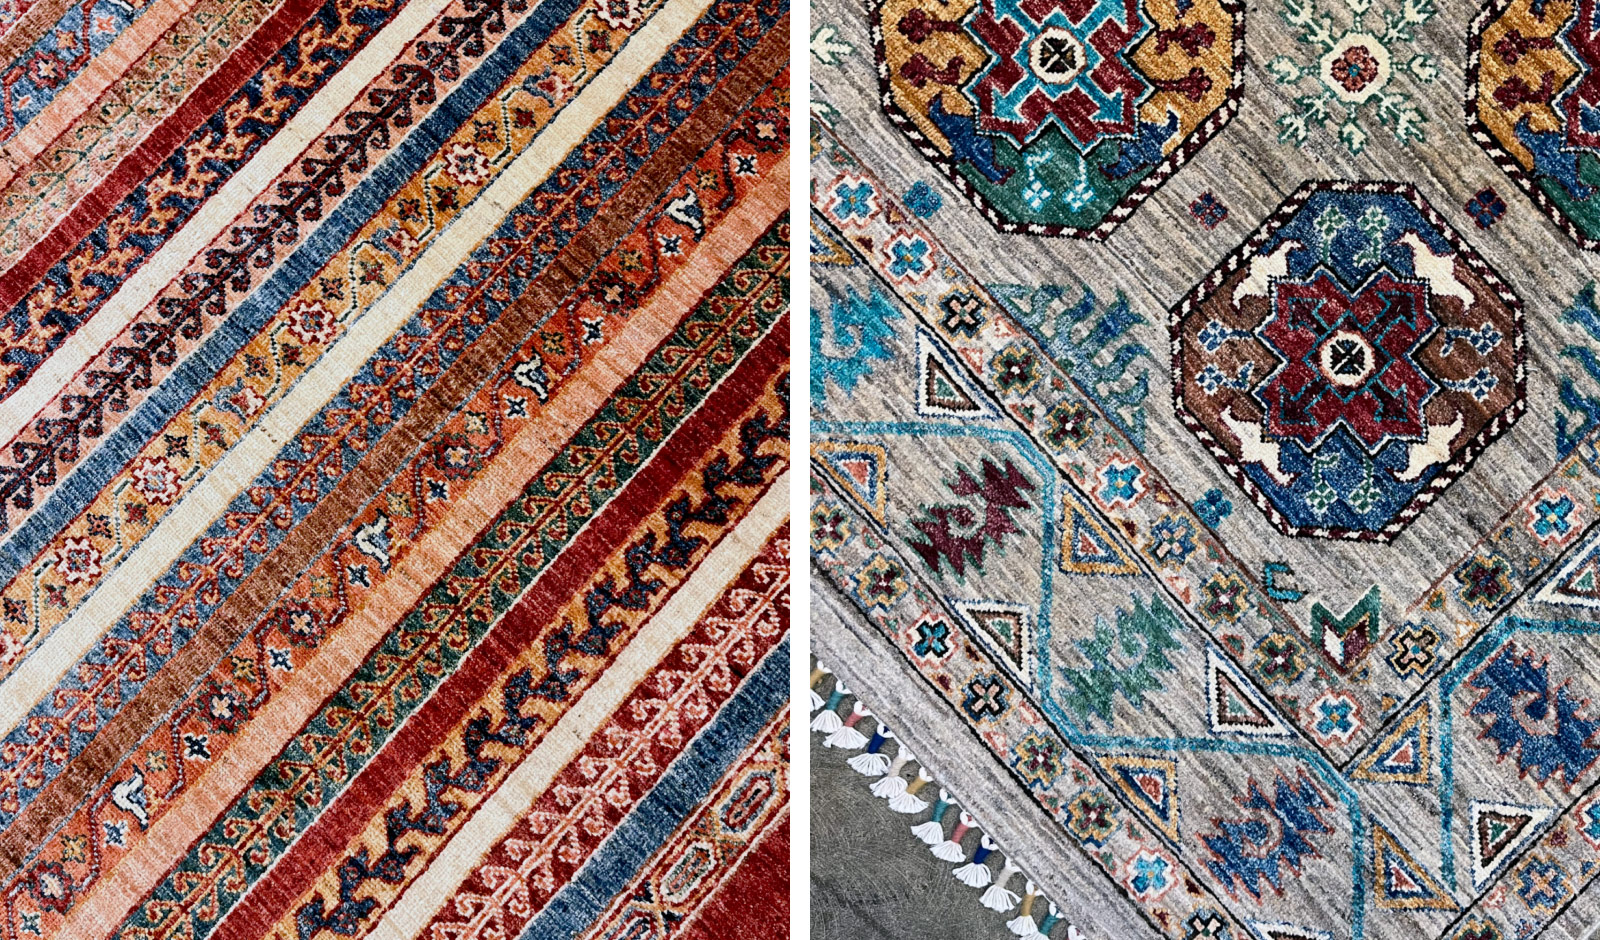 One-of-a-kind hand-knotted rugs